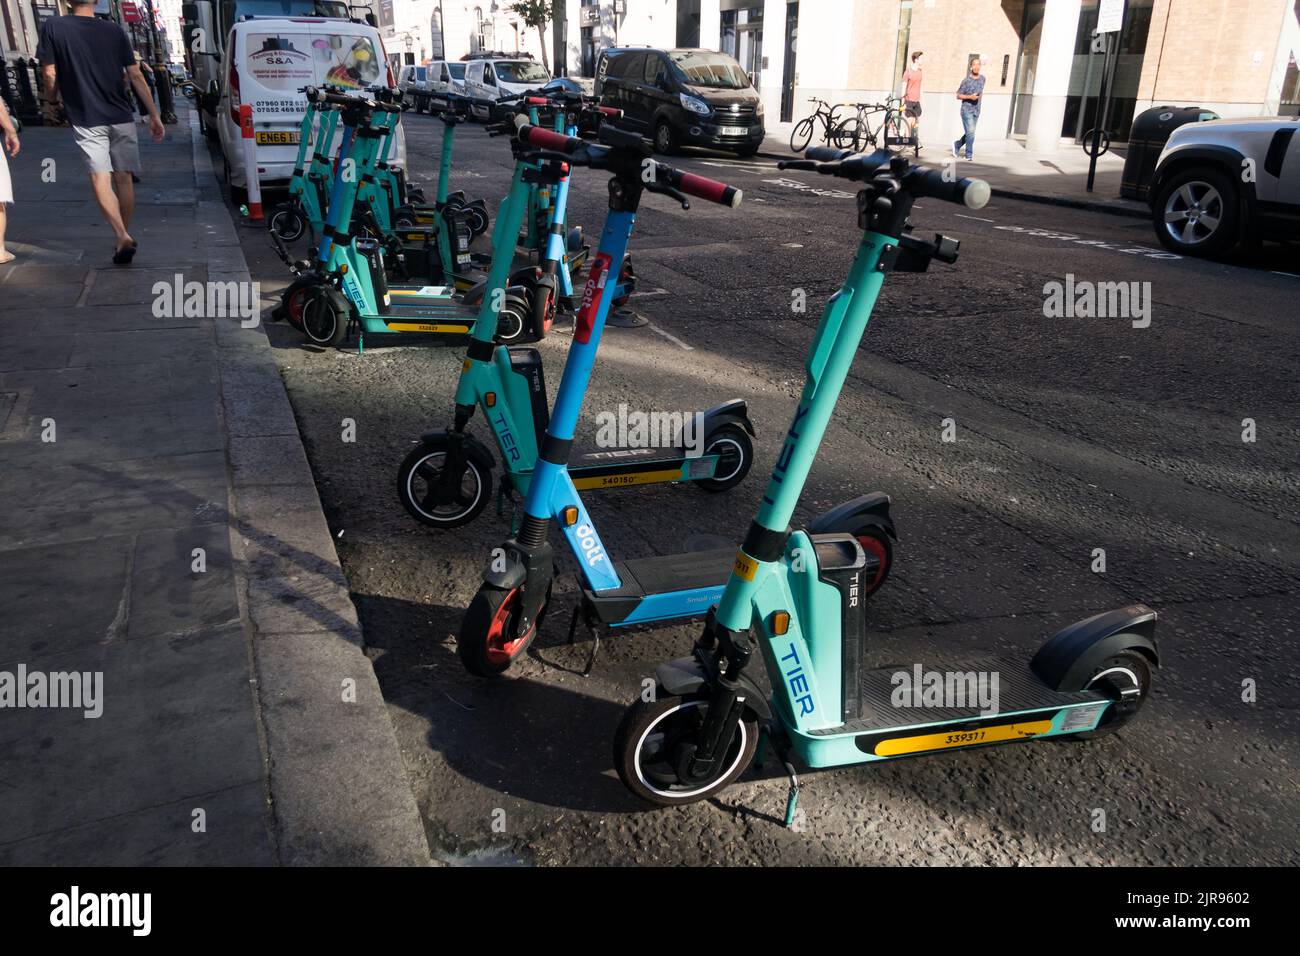 Tier e-scooter being scattered along  a road in London city center Stock Photo